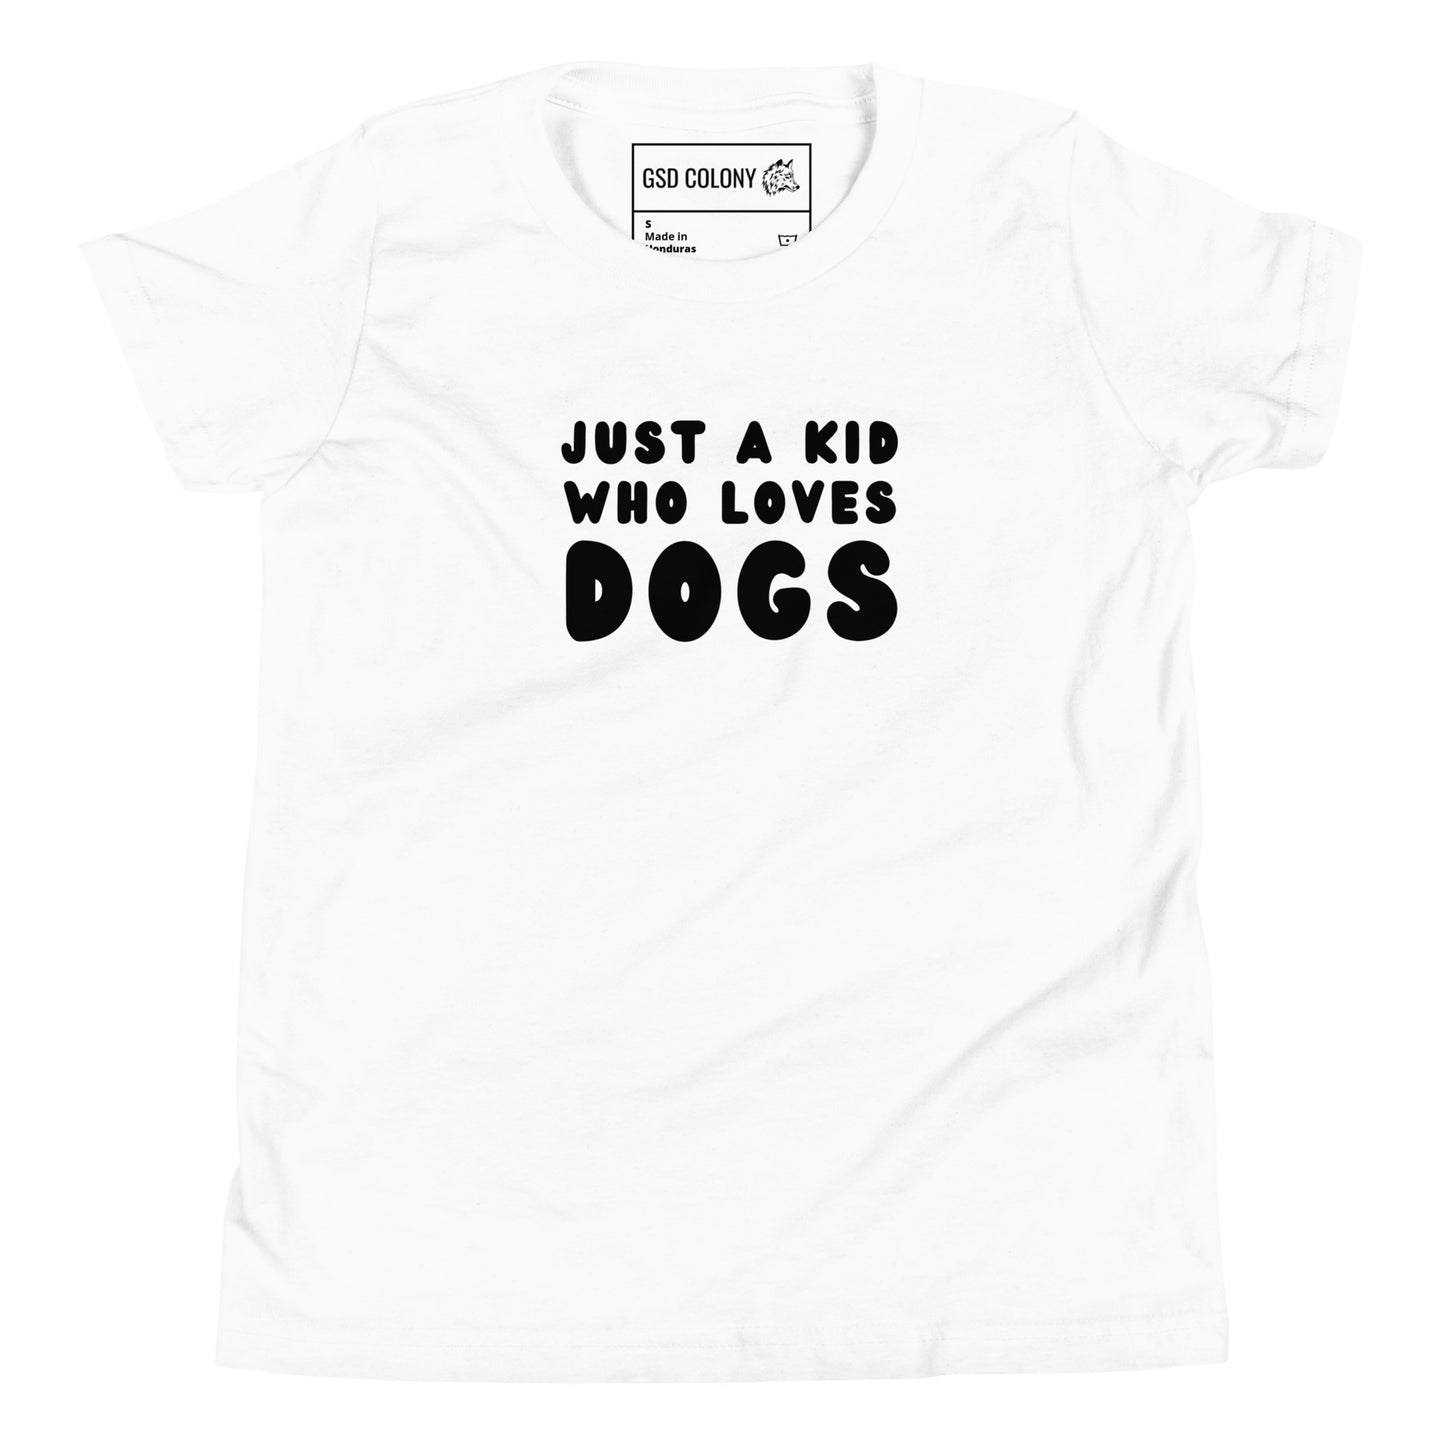 Just a kid who loves dogs kid tshirt for German Shepherd lovers, white color - GSD Colony